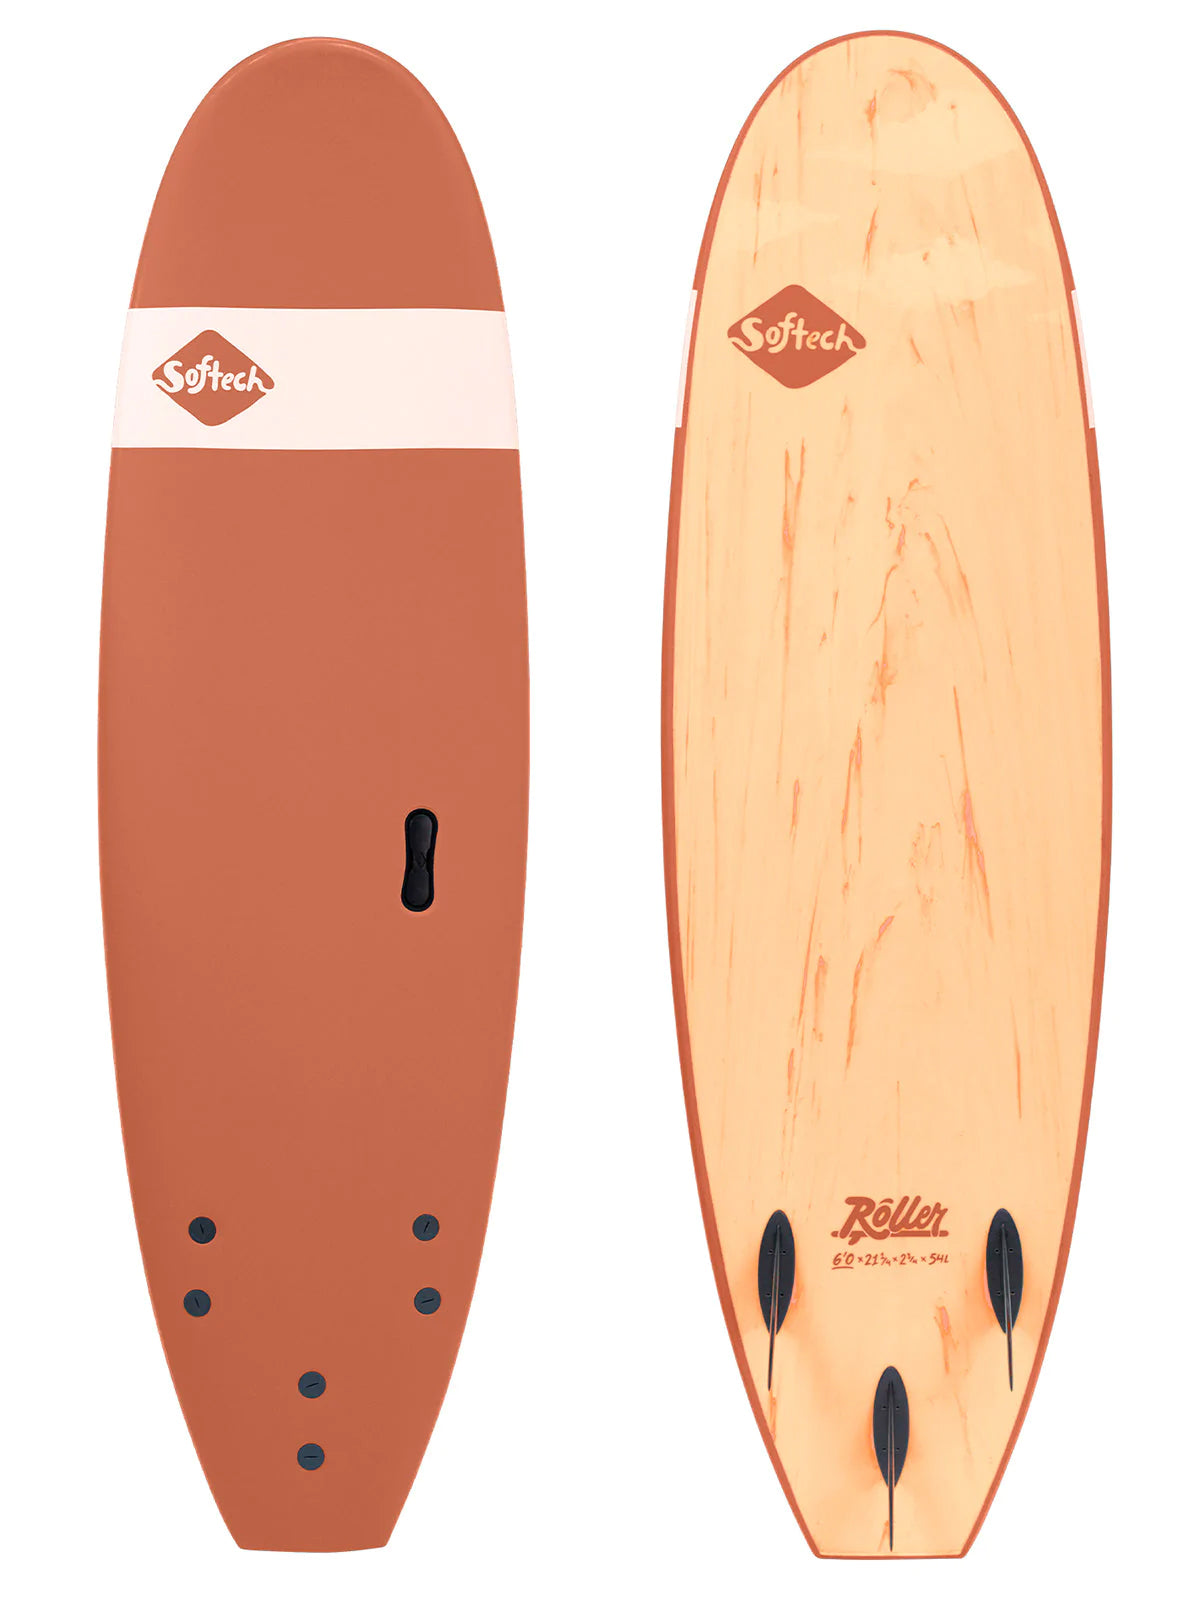 Softech 6'6" Roller Clay